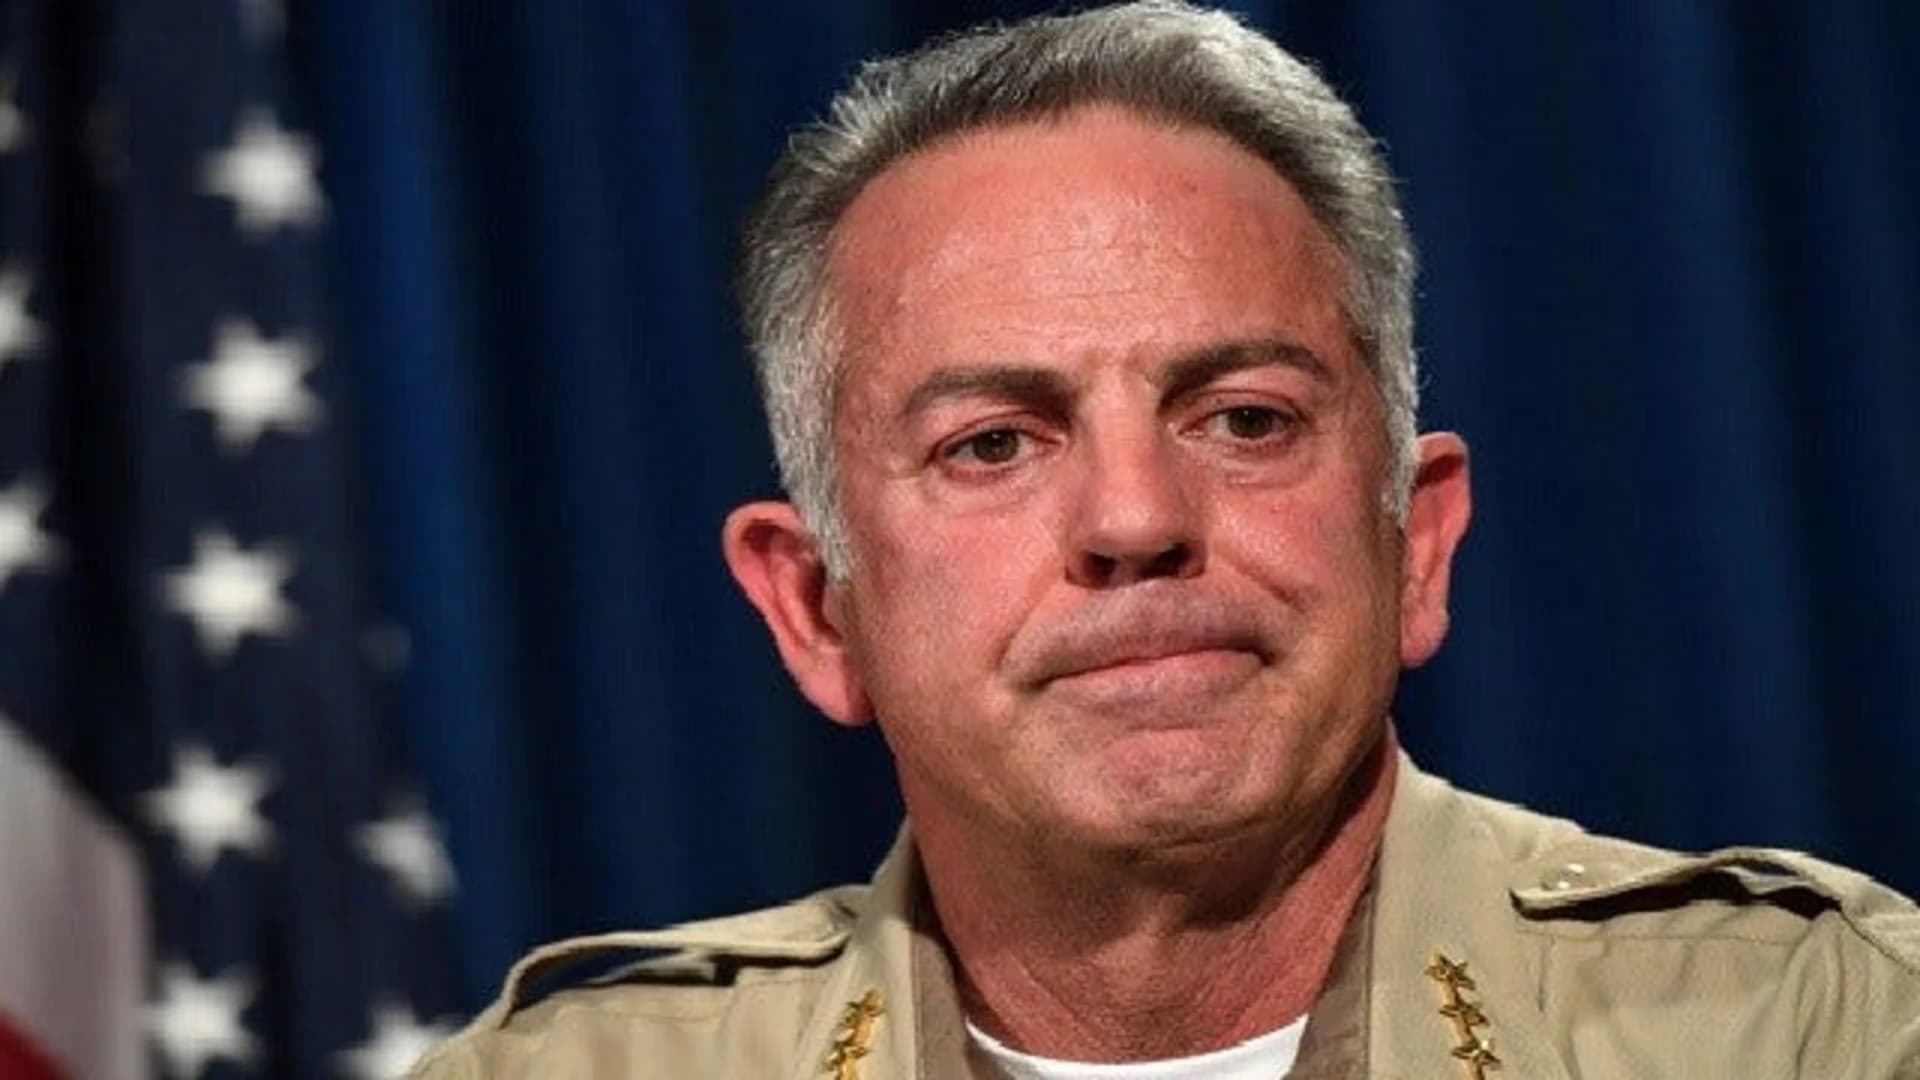 Sheriff: No motive uncovered for Las Vegas mass shooting